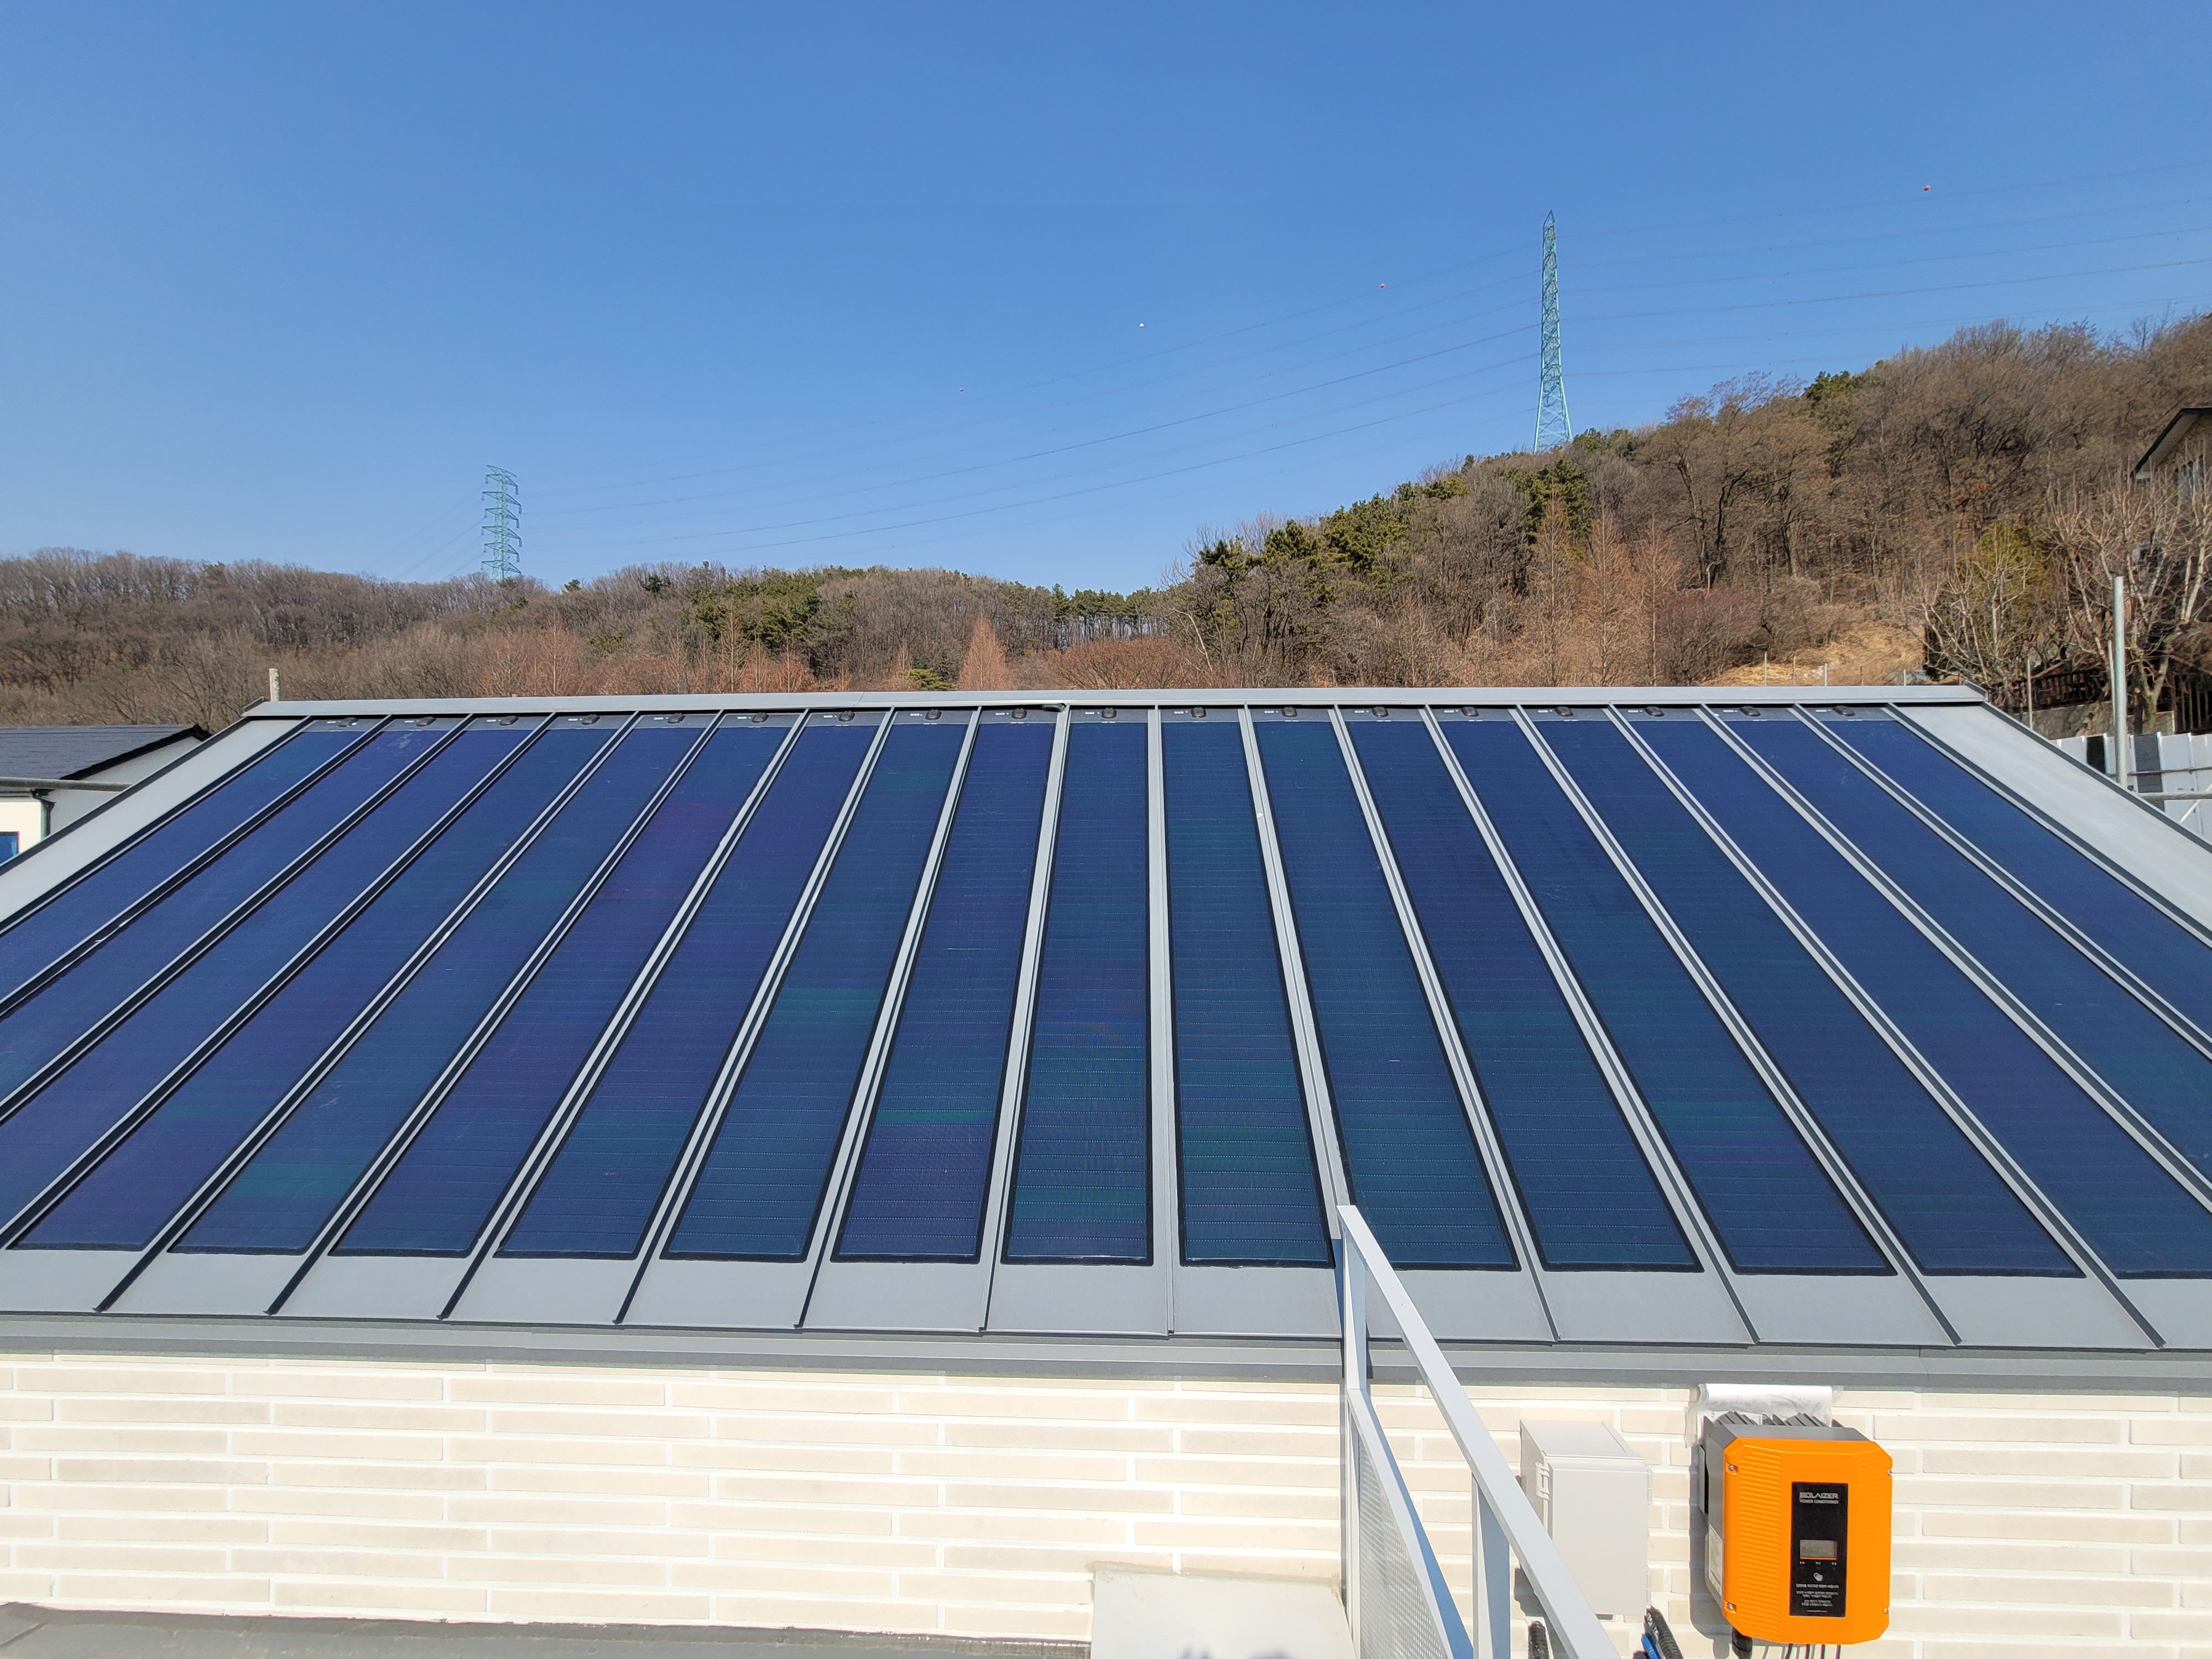 Roof integrated photovoltaic power generation system [첨부 이미지1]